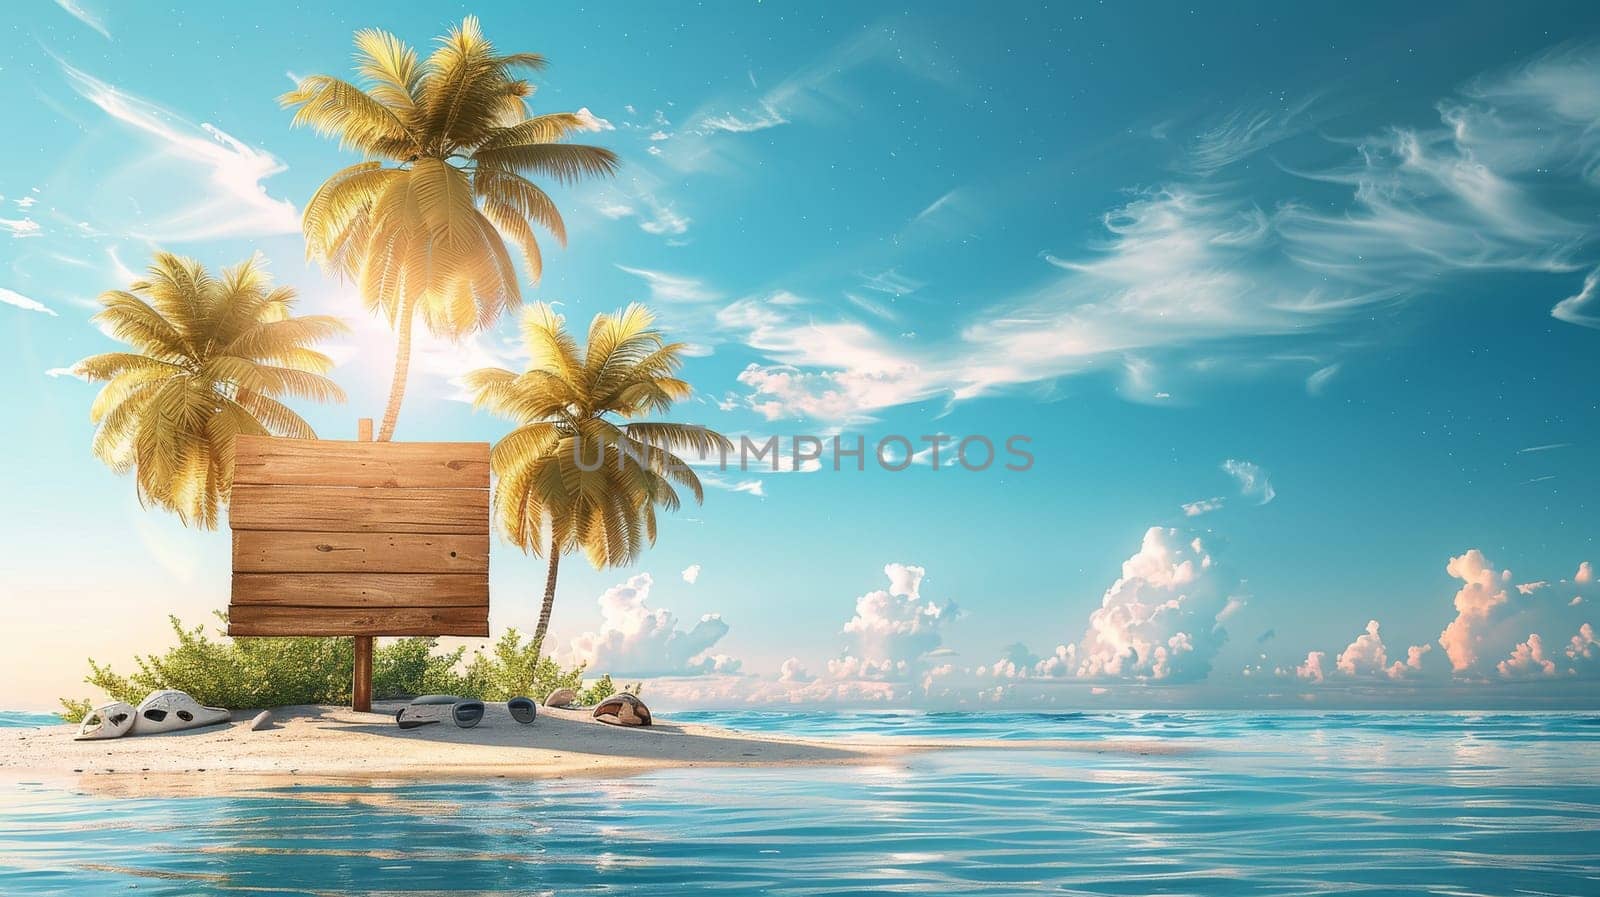 A signboard is placed on a beach next to a palm tree. The signboard is wooden and has a message on it. The beach is calm and peaceful, with the palm tree providing shade and a sense of relaxation